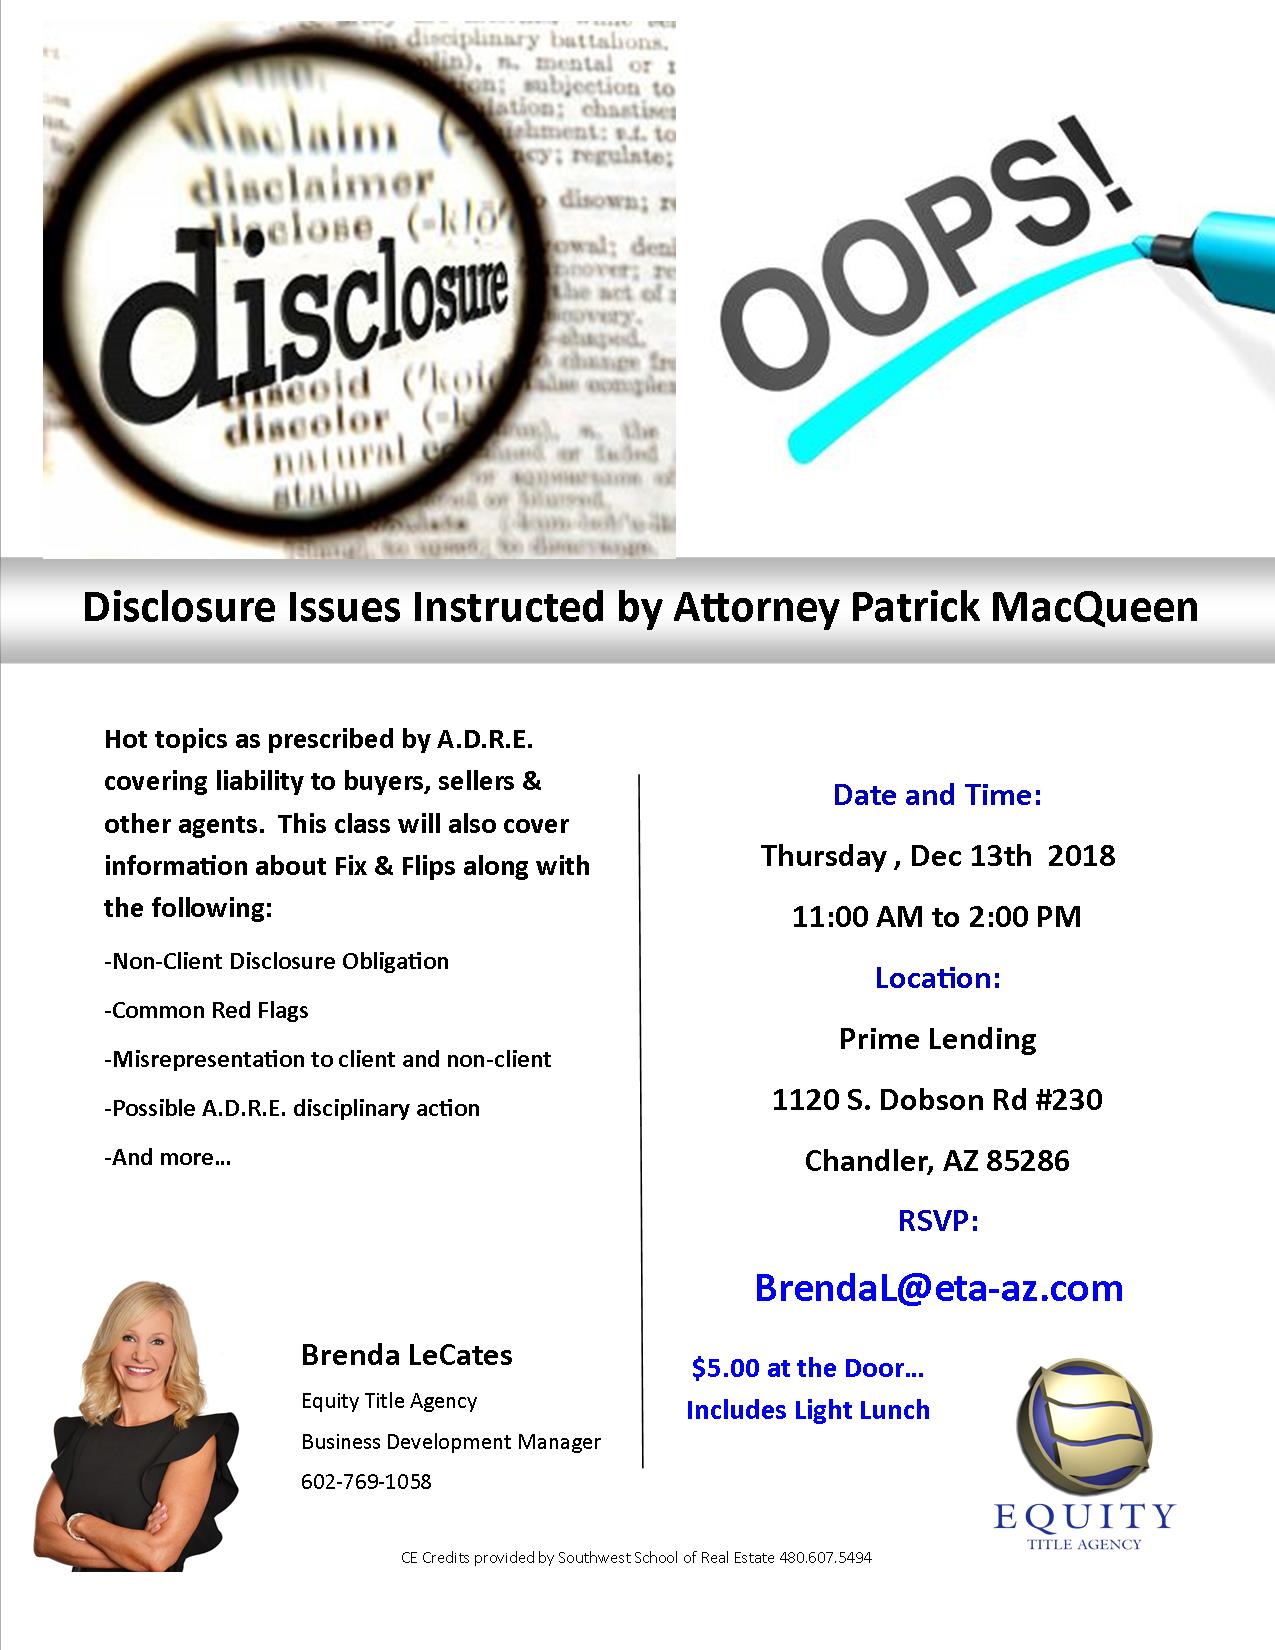 Disclosure Issues with Patrick MacQueen